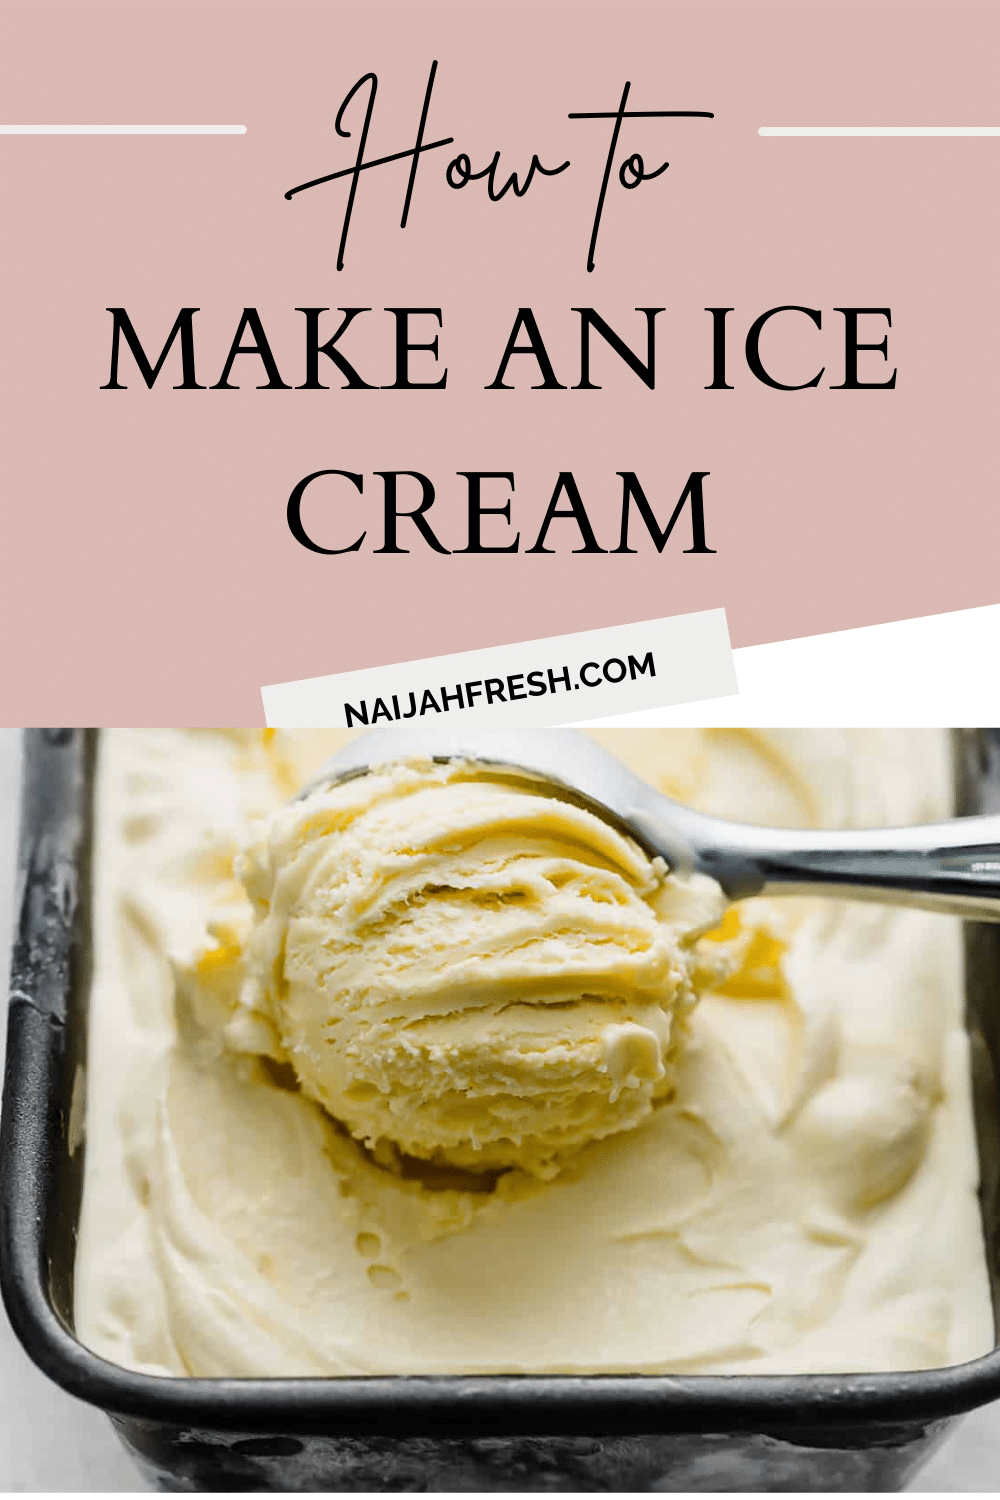 How to make an ice cream step by step